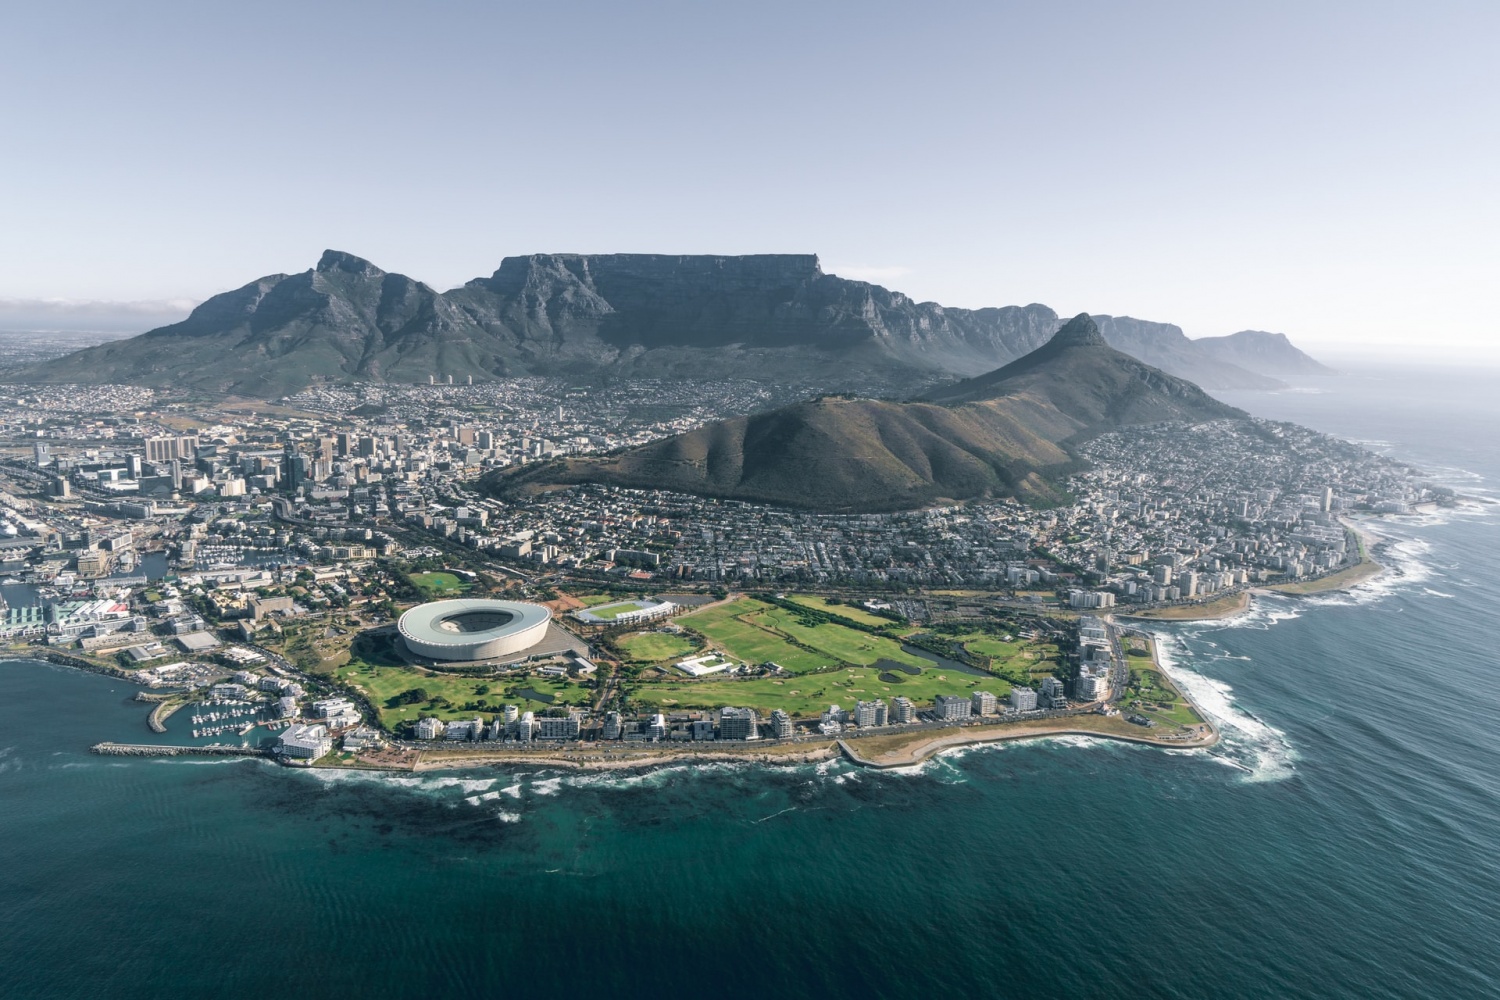 Cape Town to Pay Businesses for Excess Solar Power: Incentive at $0.05 per kWh